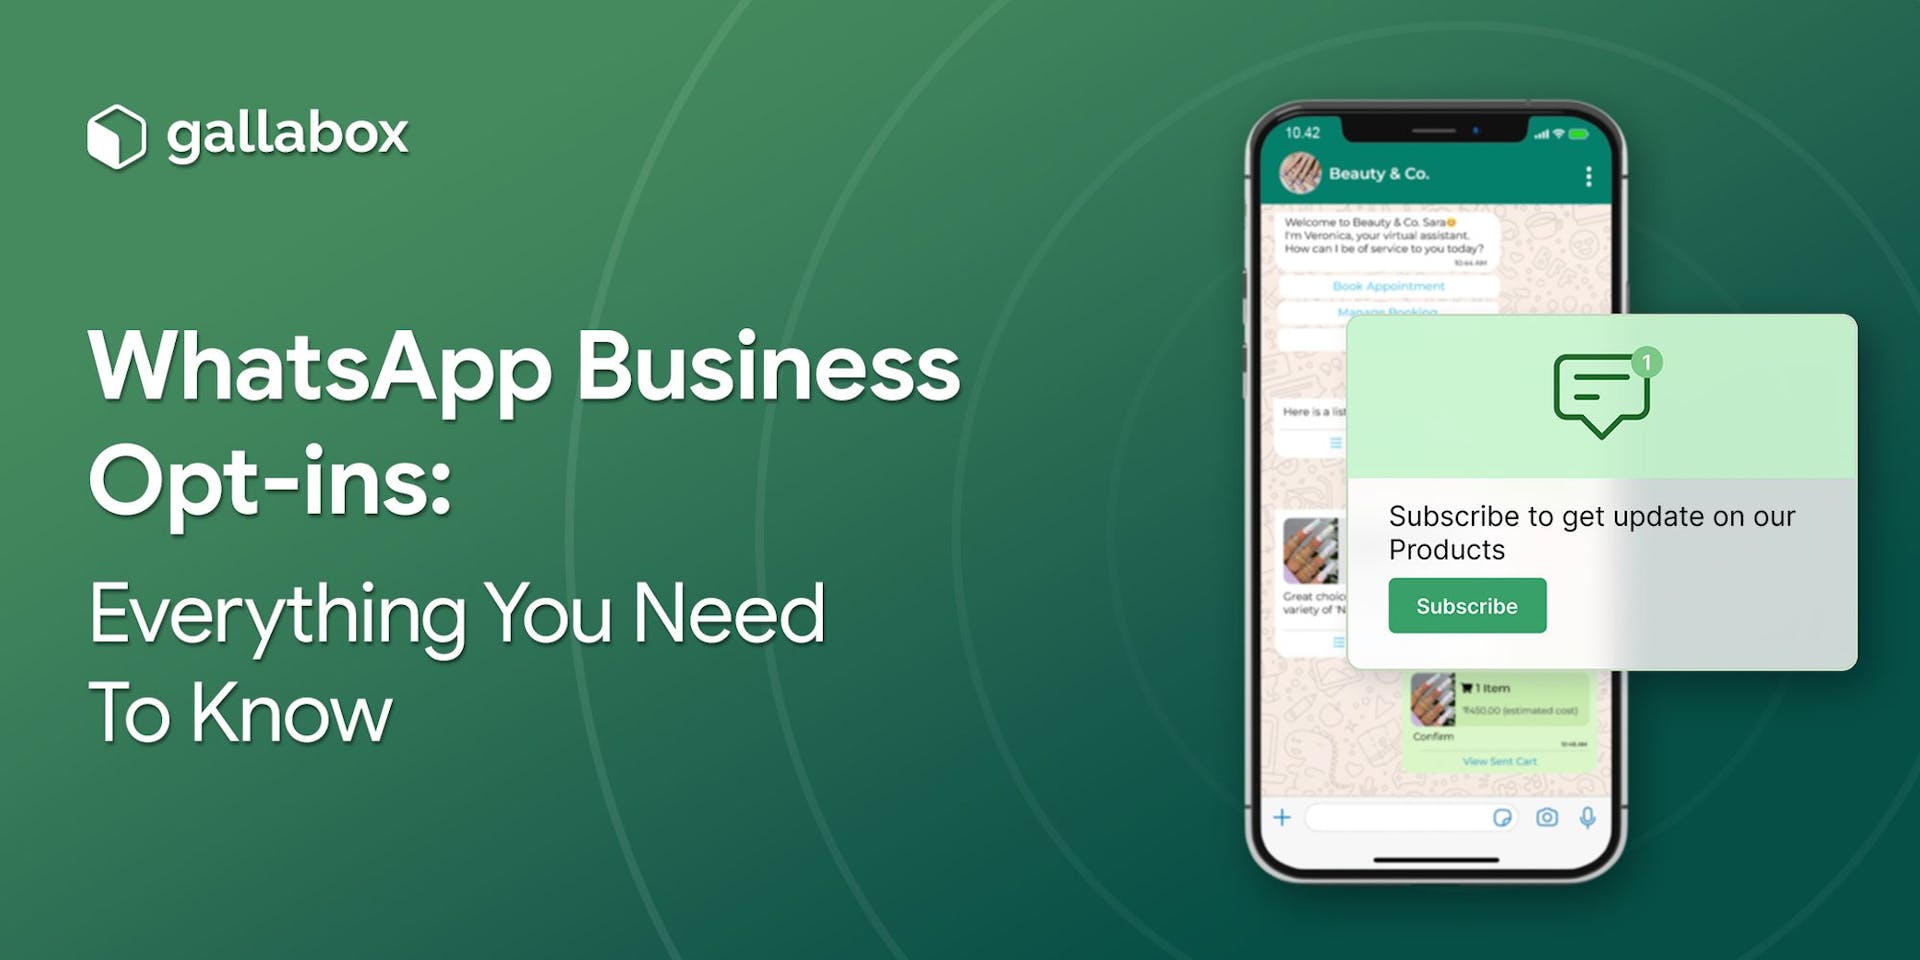 WhatsApp Business Opt-ins: Everything You Need To Know